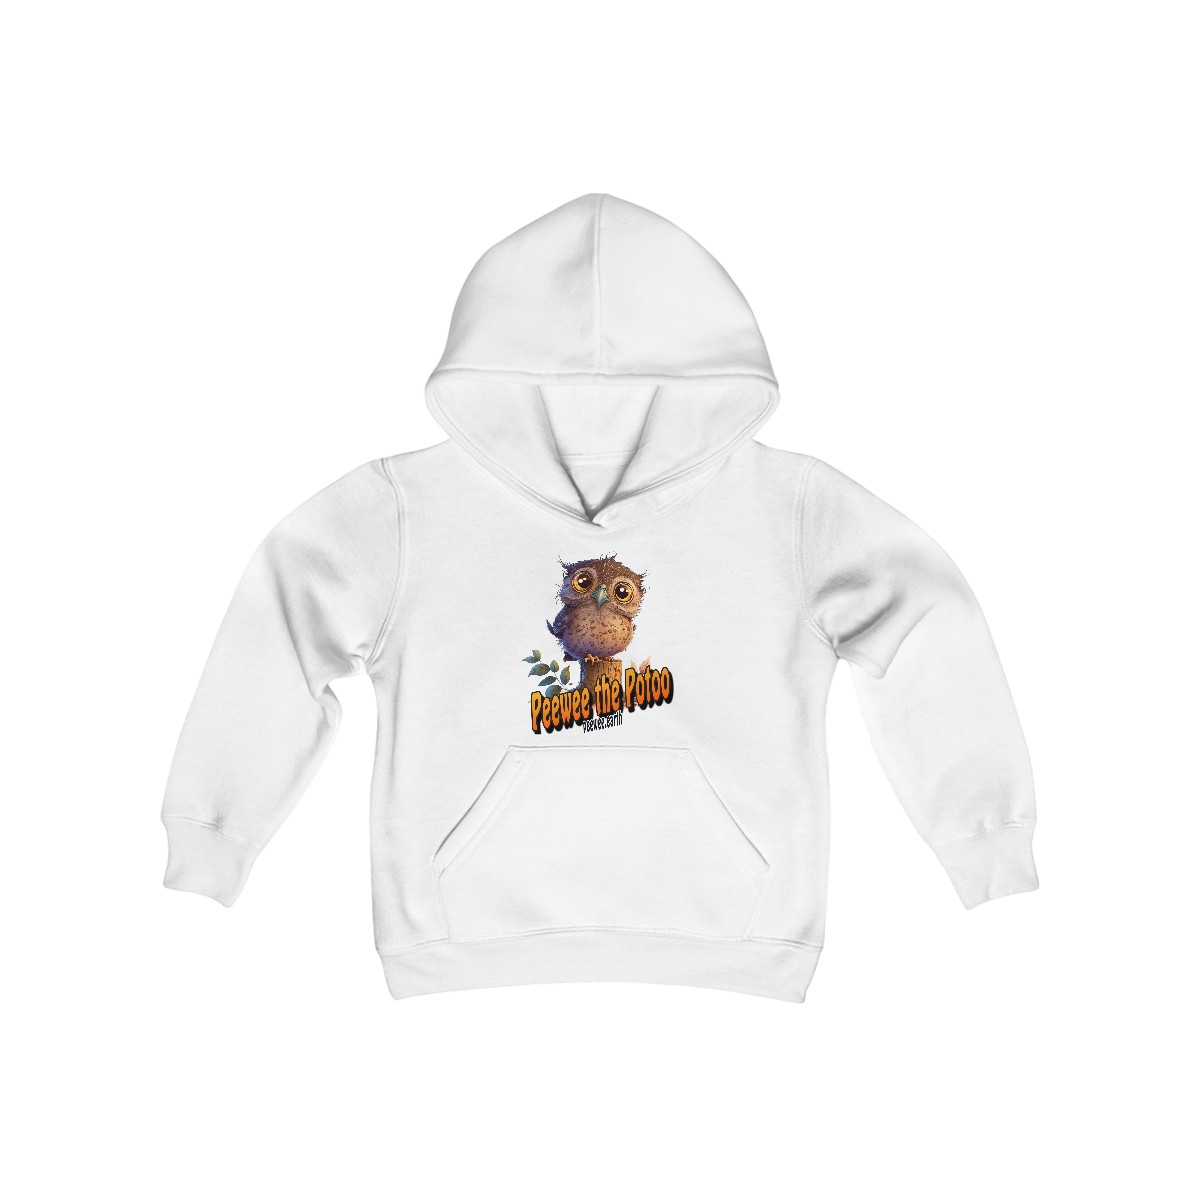 Official Peewee the Potoo youth hoodie - Cozy Peewee product thumbnail image